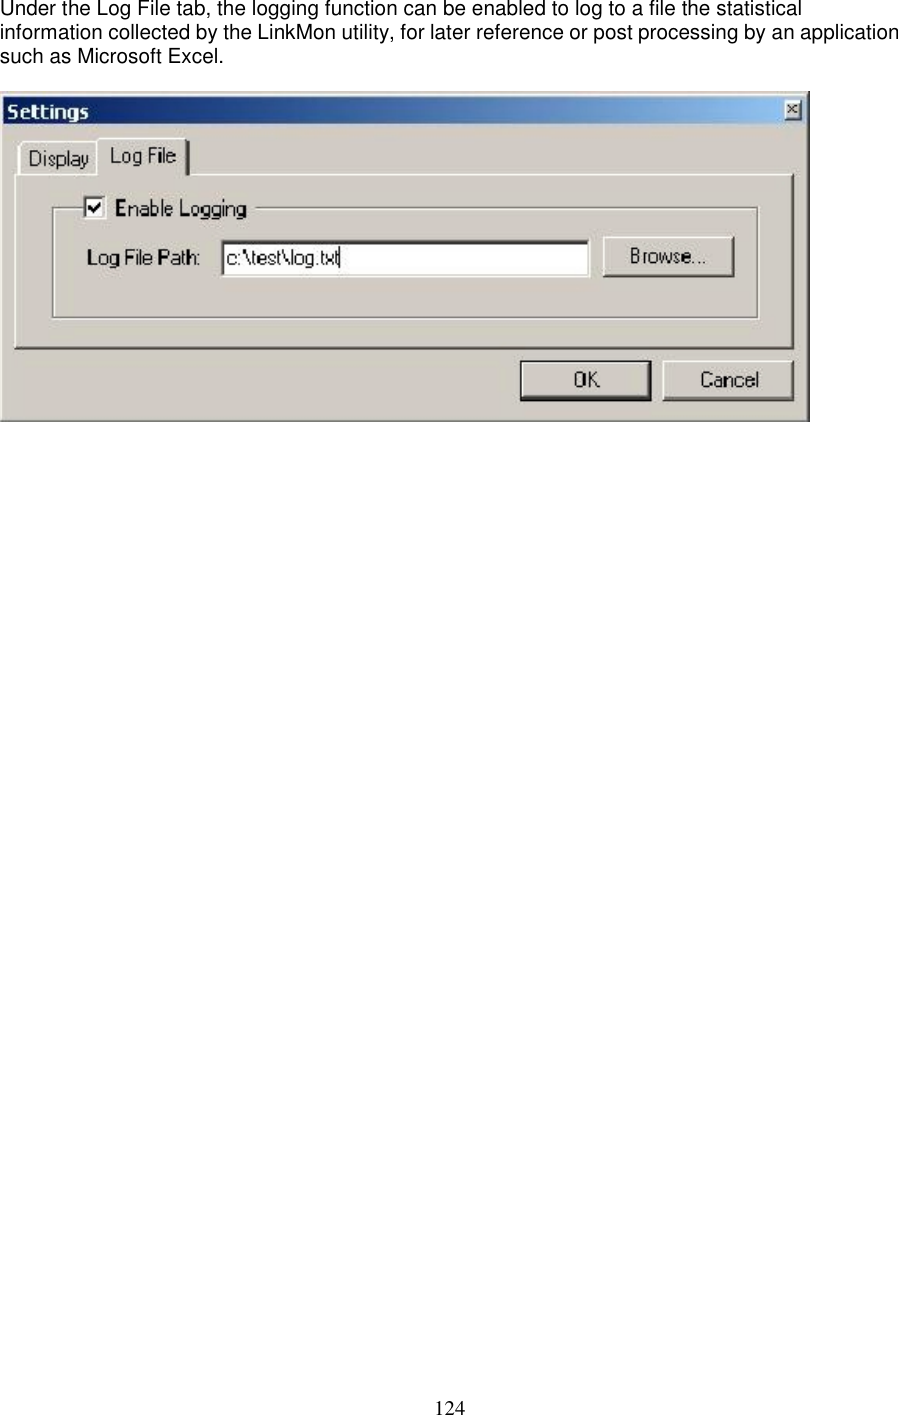 124Under the Log File tab, the logging function can be enabled to log to a file the statisticalinformation collected by the LinkMon utility, for later reference or post processing by an applicationsuch as Microsoft Excel.